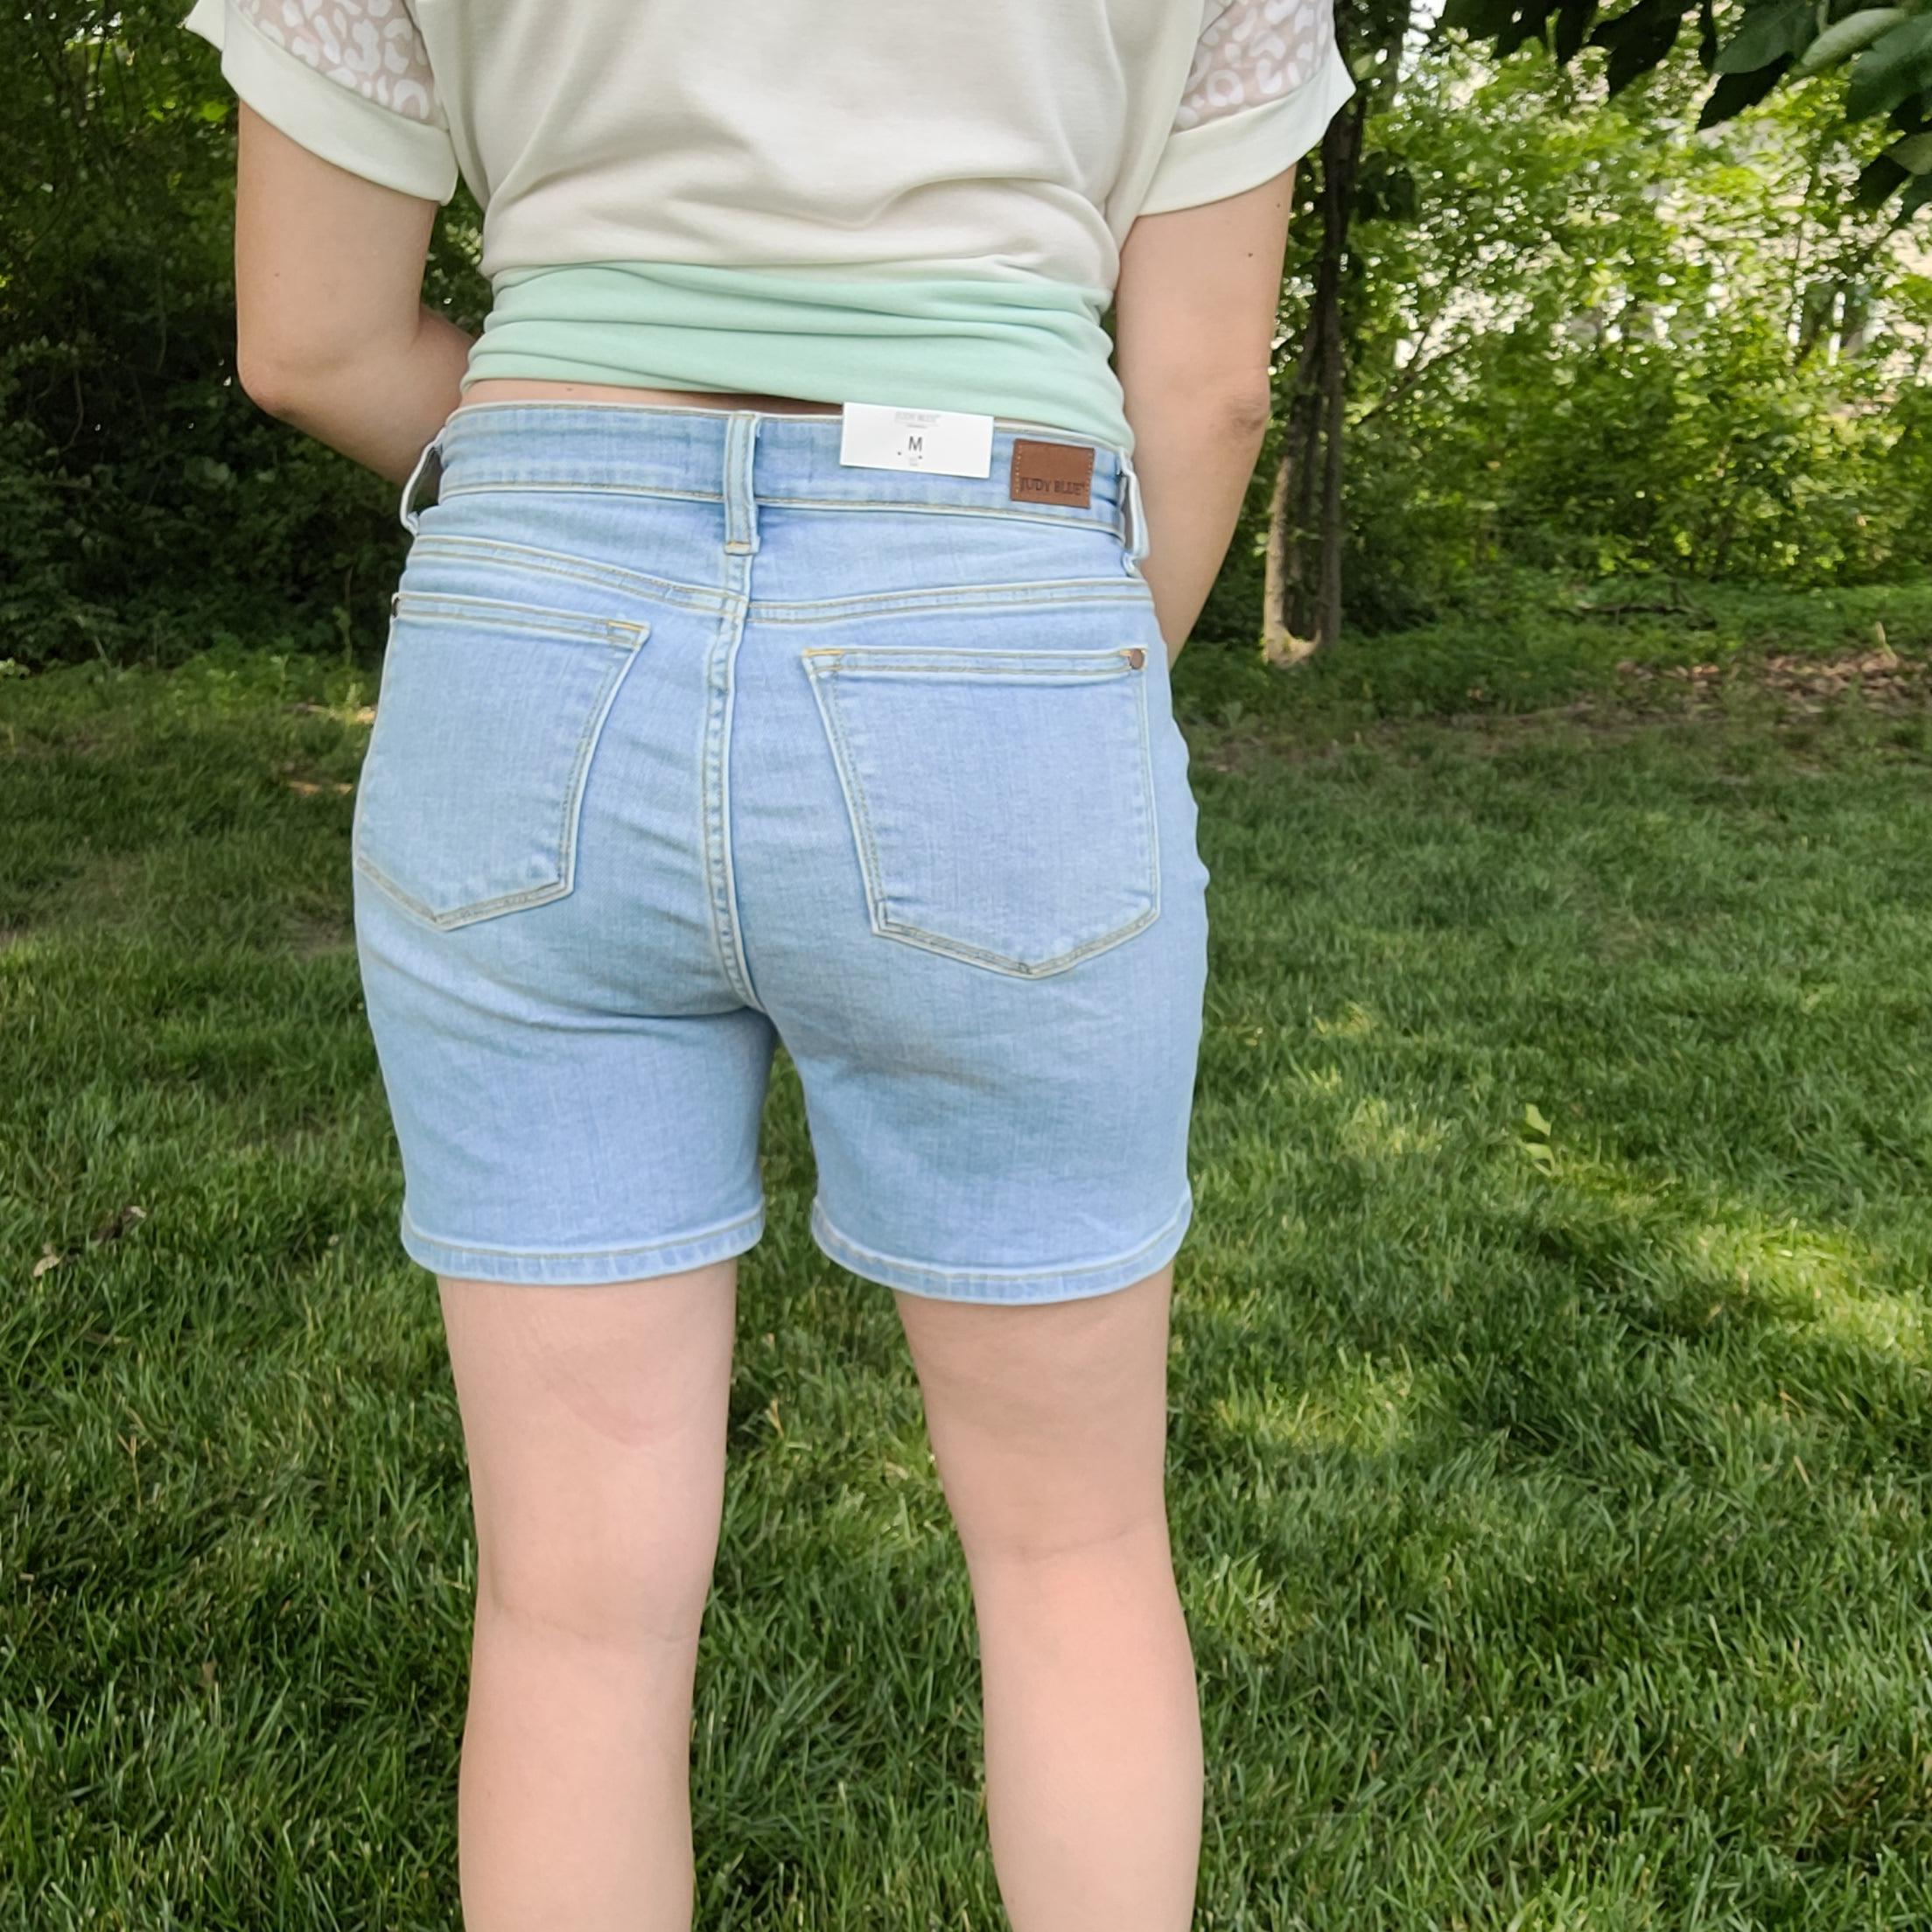 Shop Better Than Ever Denim Shorts | Judy Blue-Shorts at Ruby Joy Boutique, a Women's Clothing Store in Pickerington, Ohio